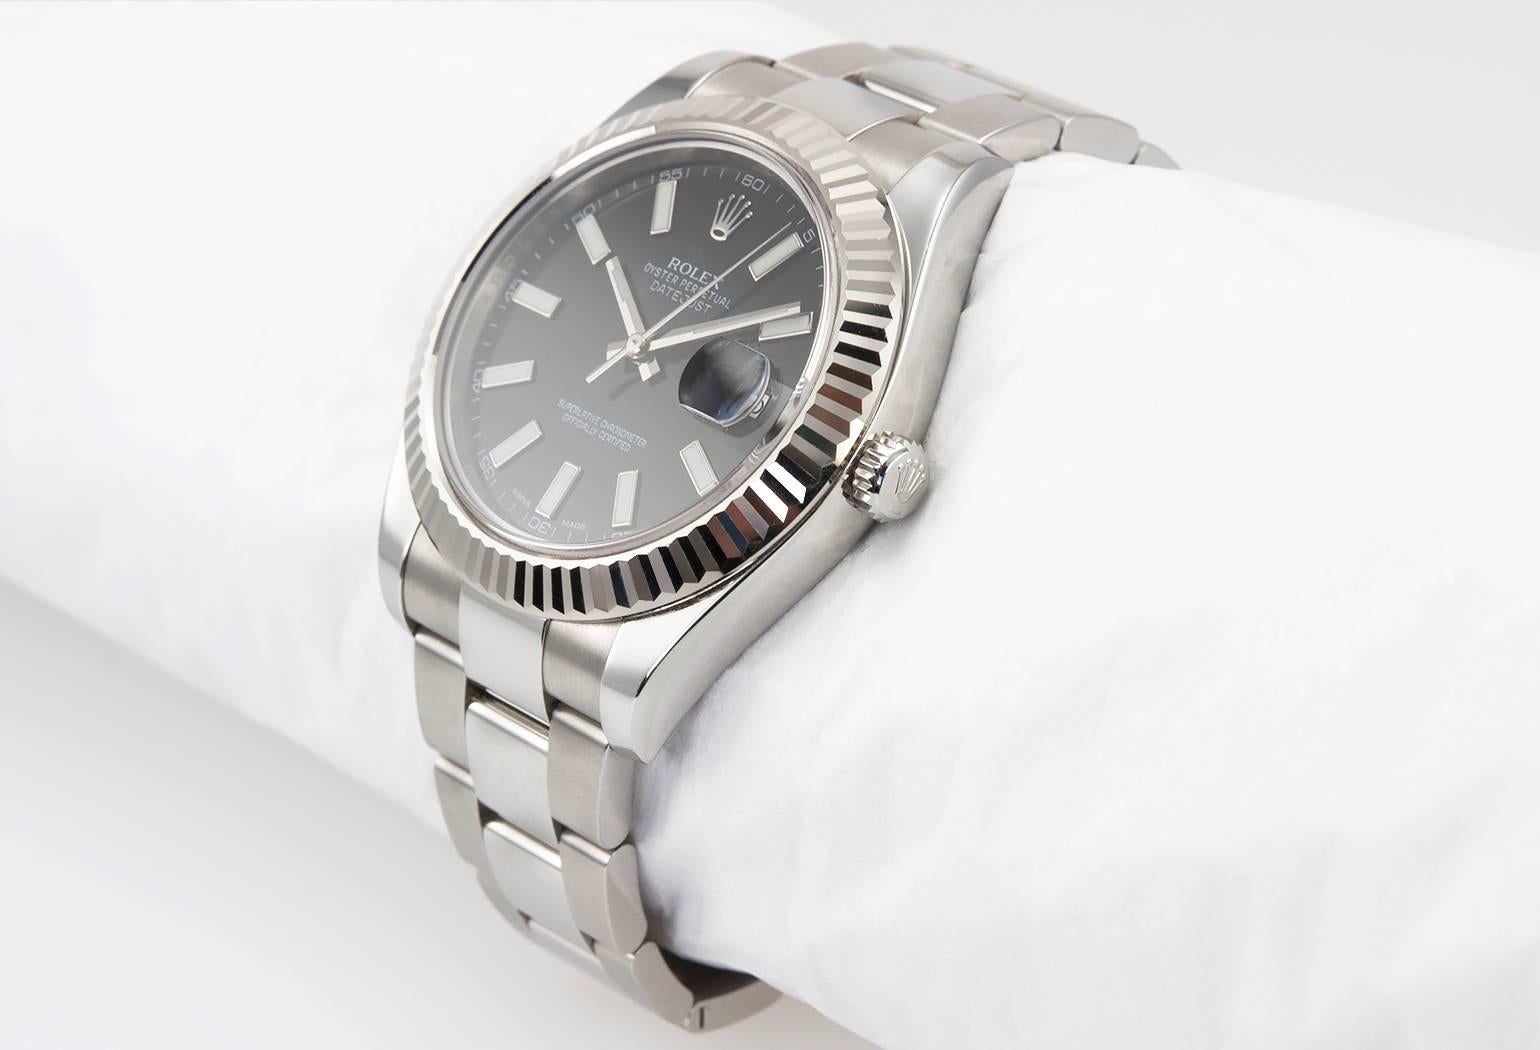 Rolex DateJust II wristwatch in stainless steel with a 18K white gold fluted bezel, reference 116334. This Rolex watch features a black dial with white stick markers, stainless steel Oyster bracelet, sapphire crystal, steel waterproof crown. The